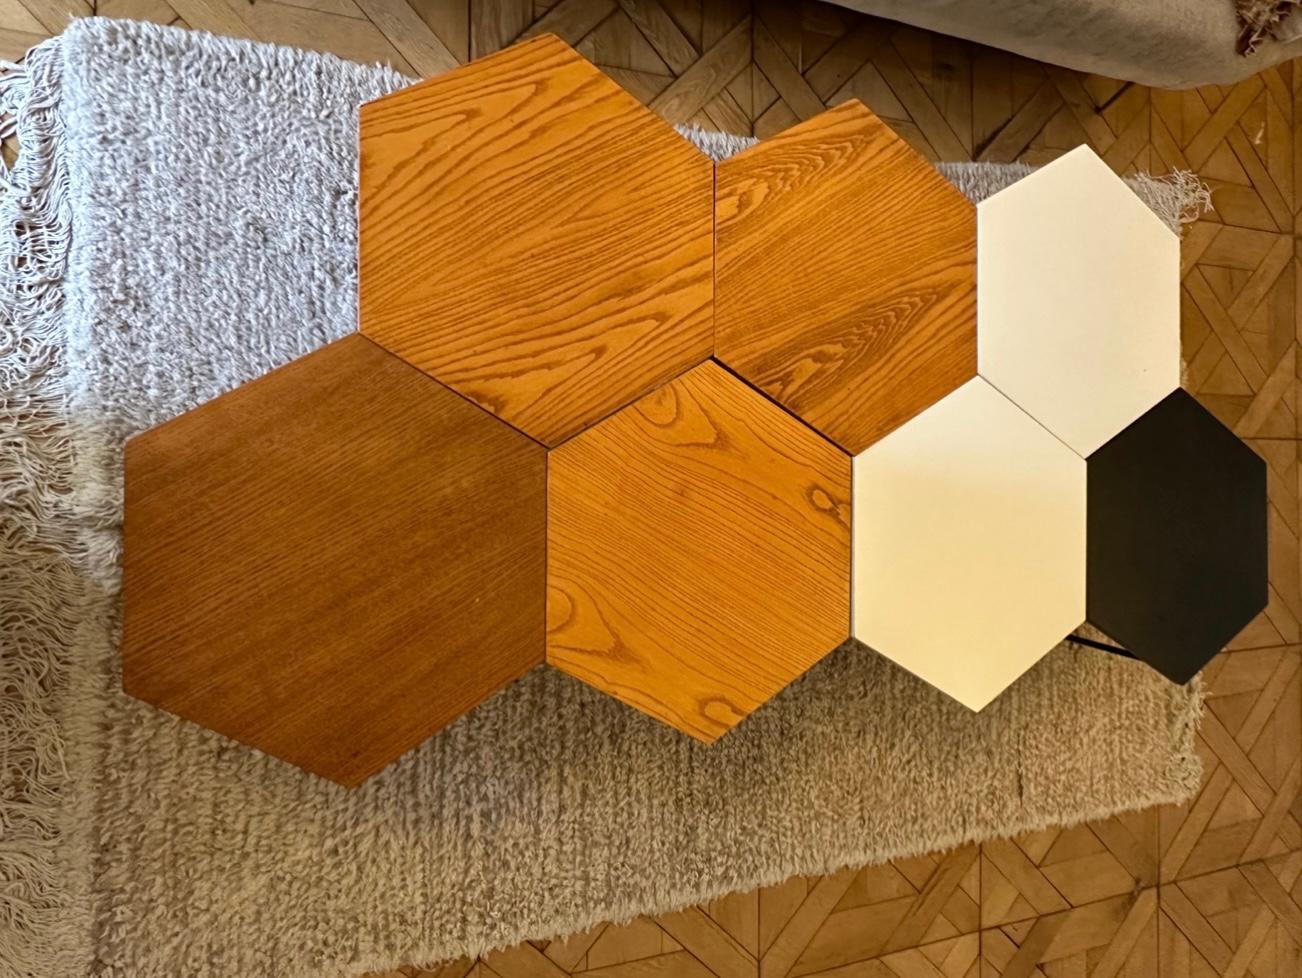 These seven Gio Ponti hexagonal coffee tables allow you to play around to create the shape that you want in any space, reminiscent of a beyhive.